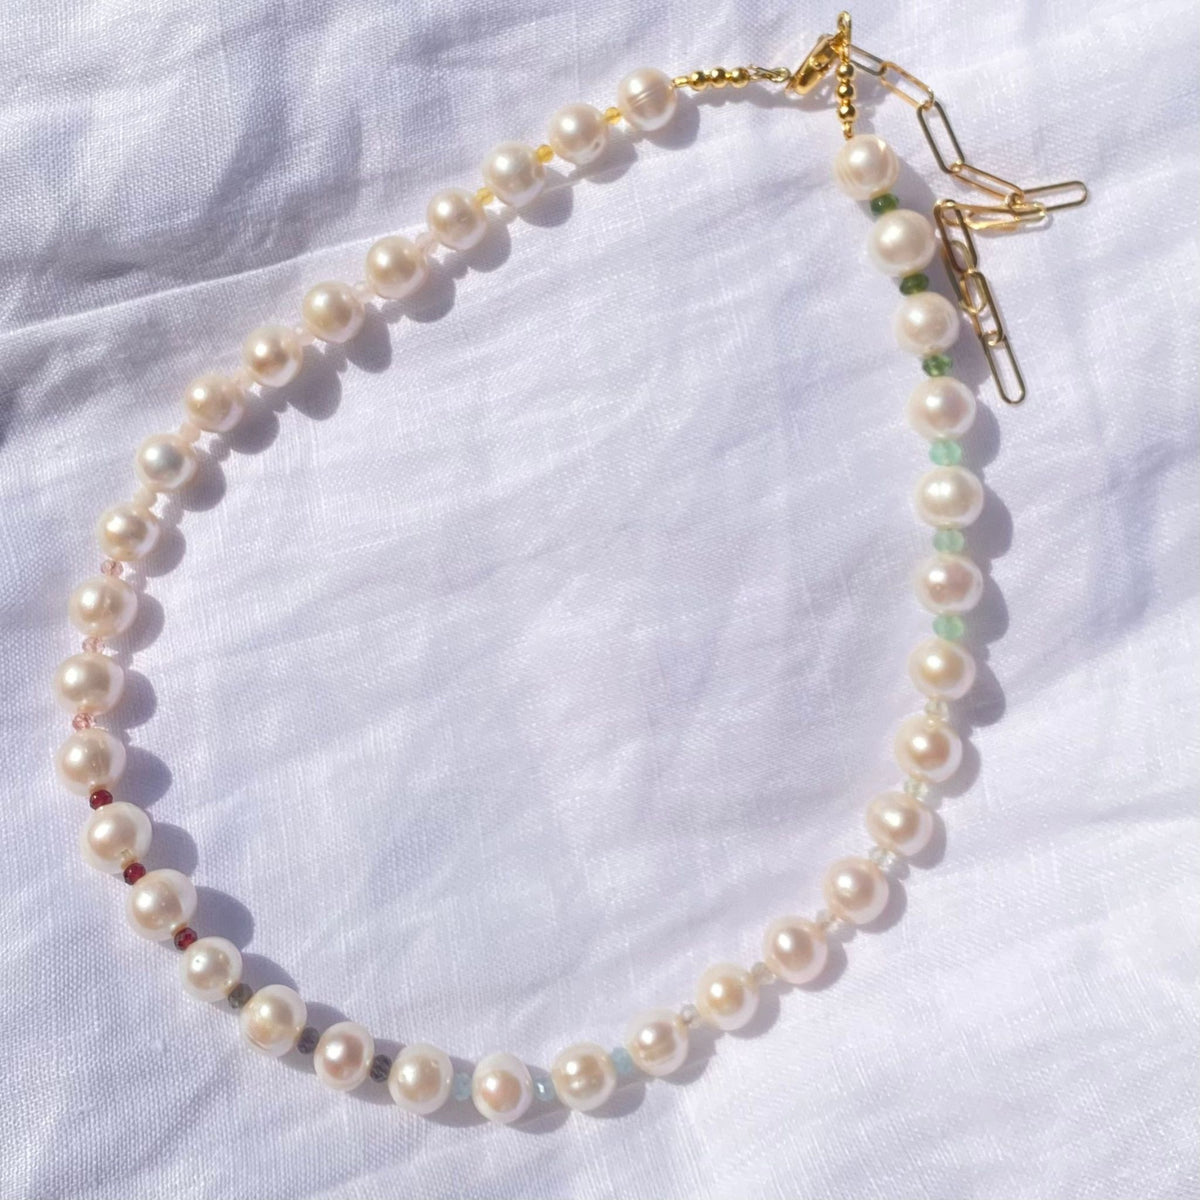 Limited Edition Large Rainbow Necklace - Pearl and Coloured Gemstone Necklace